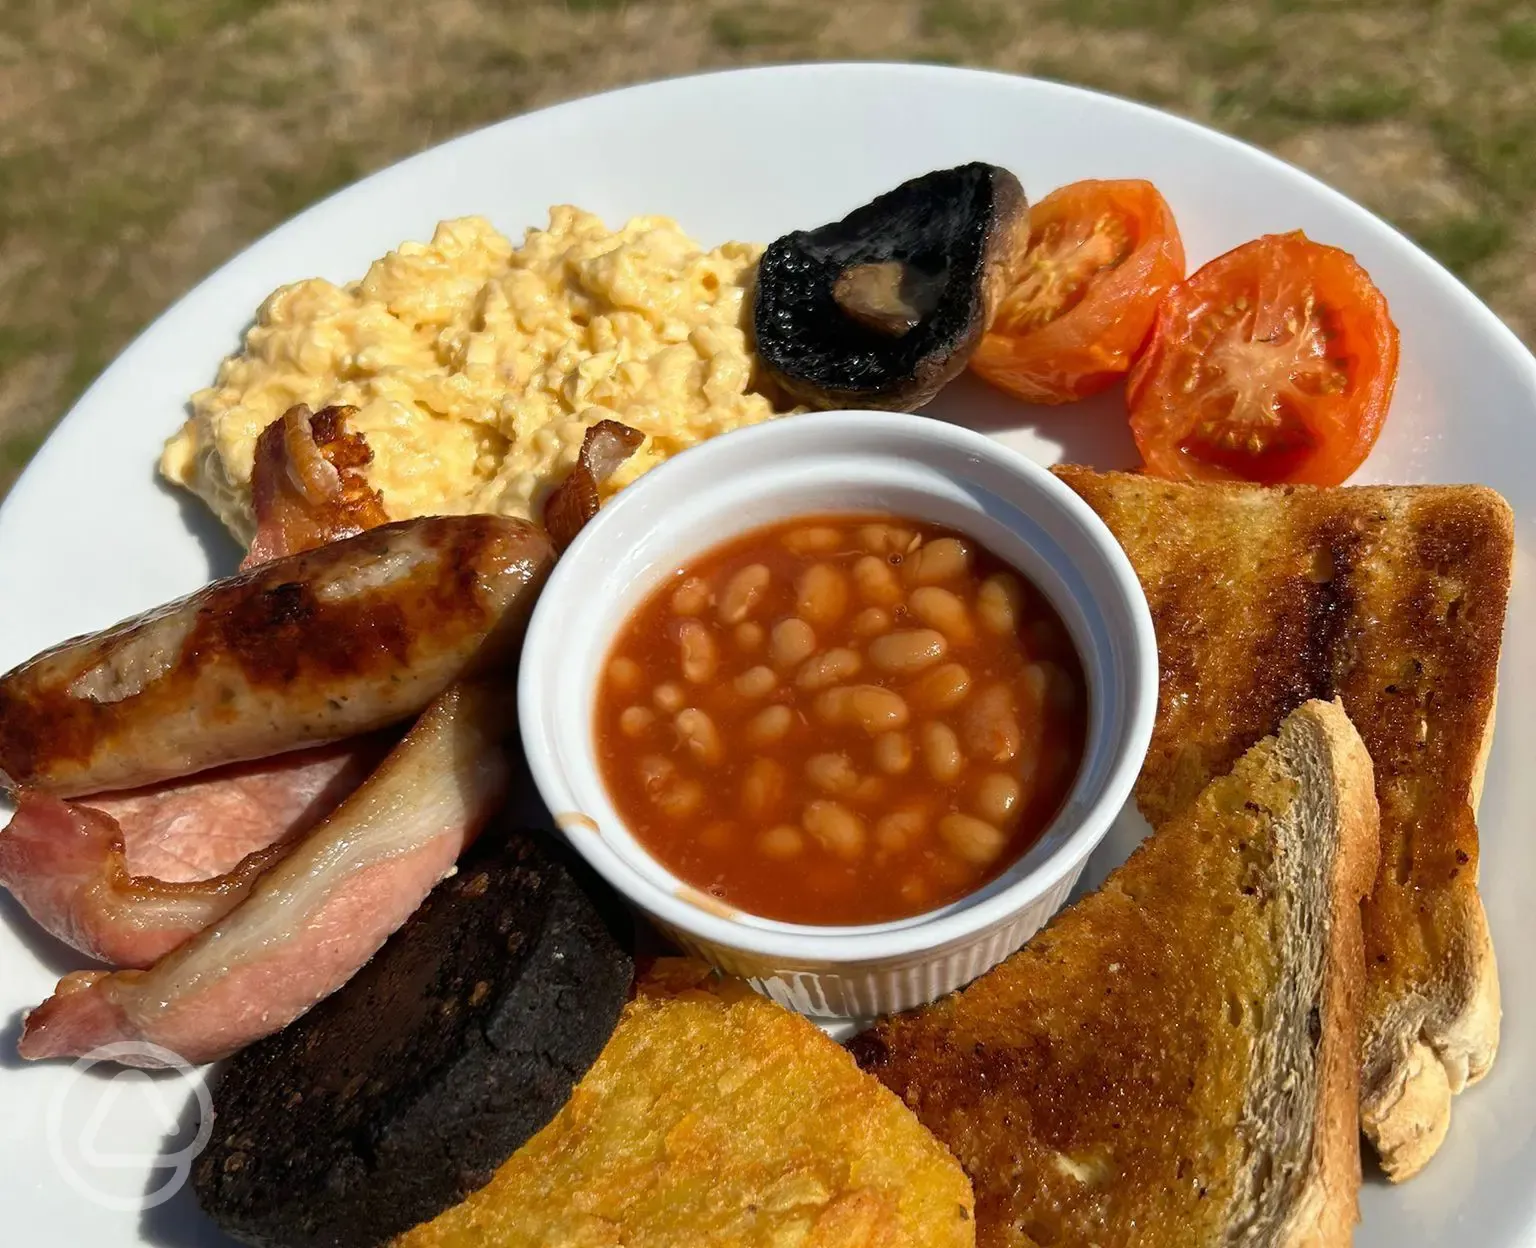 Full English available